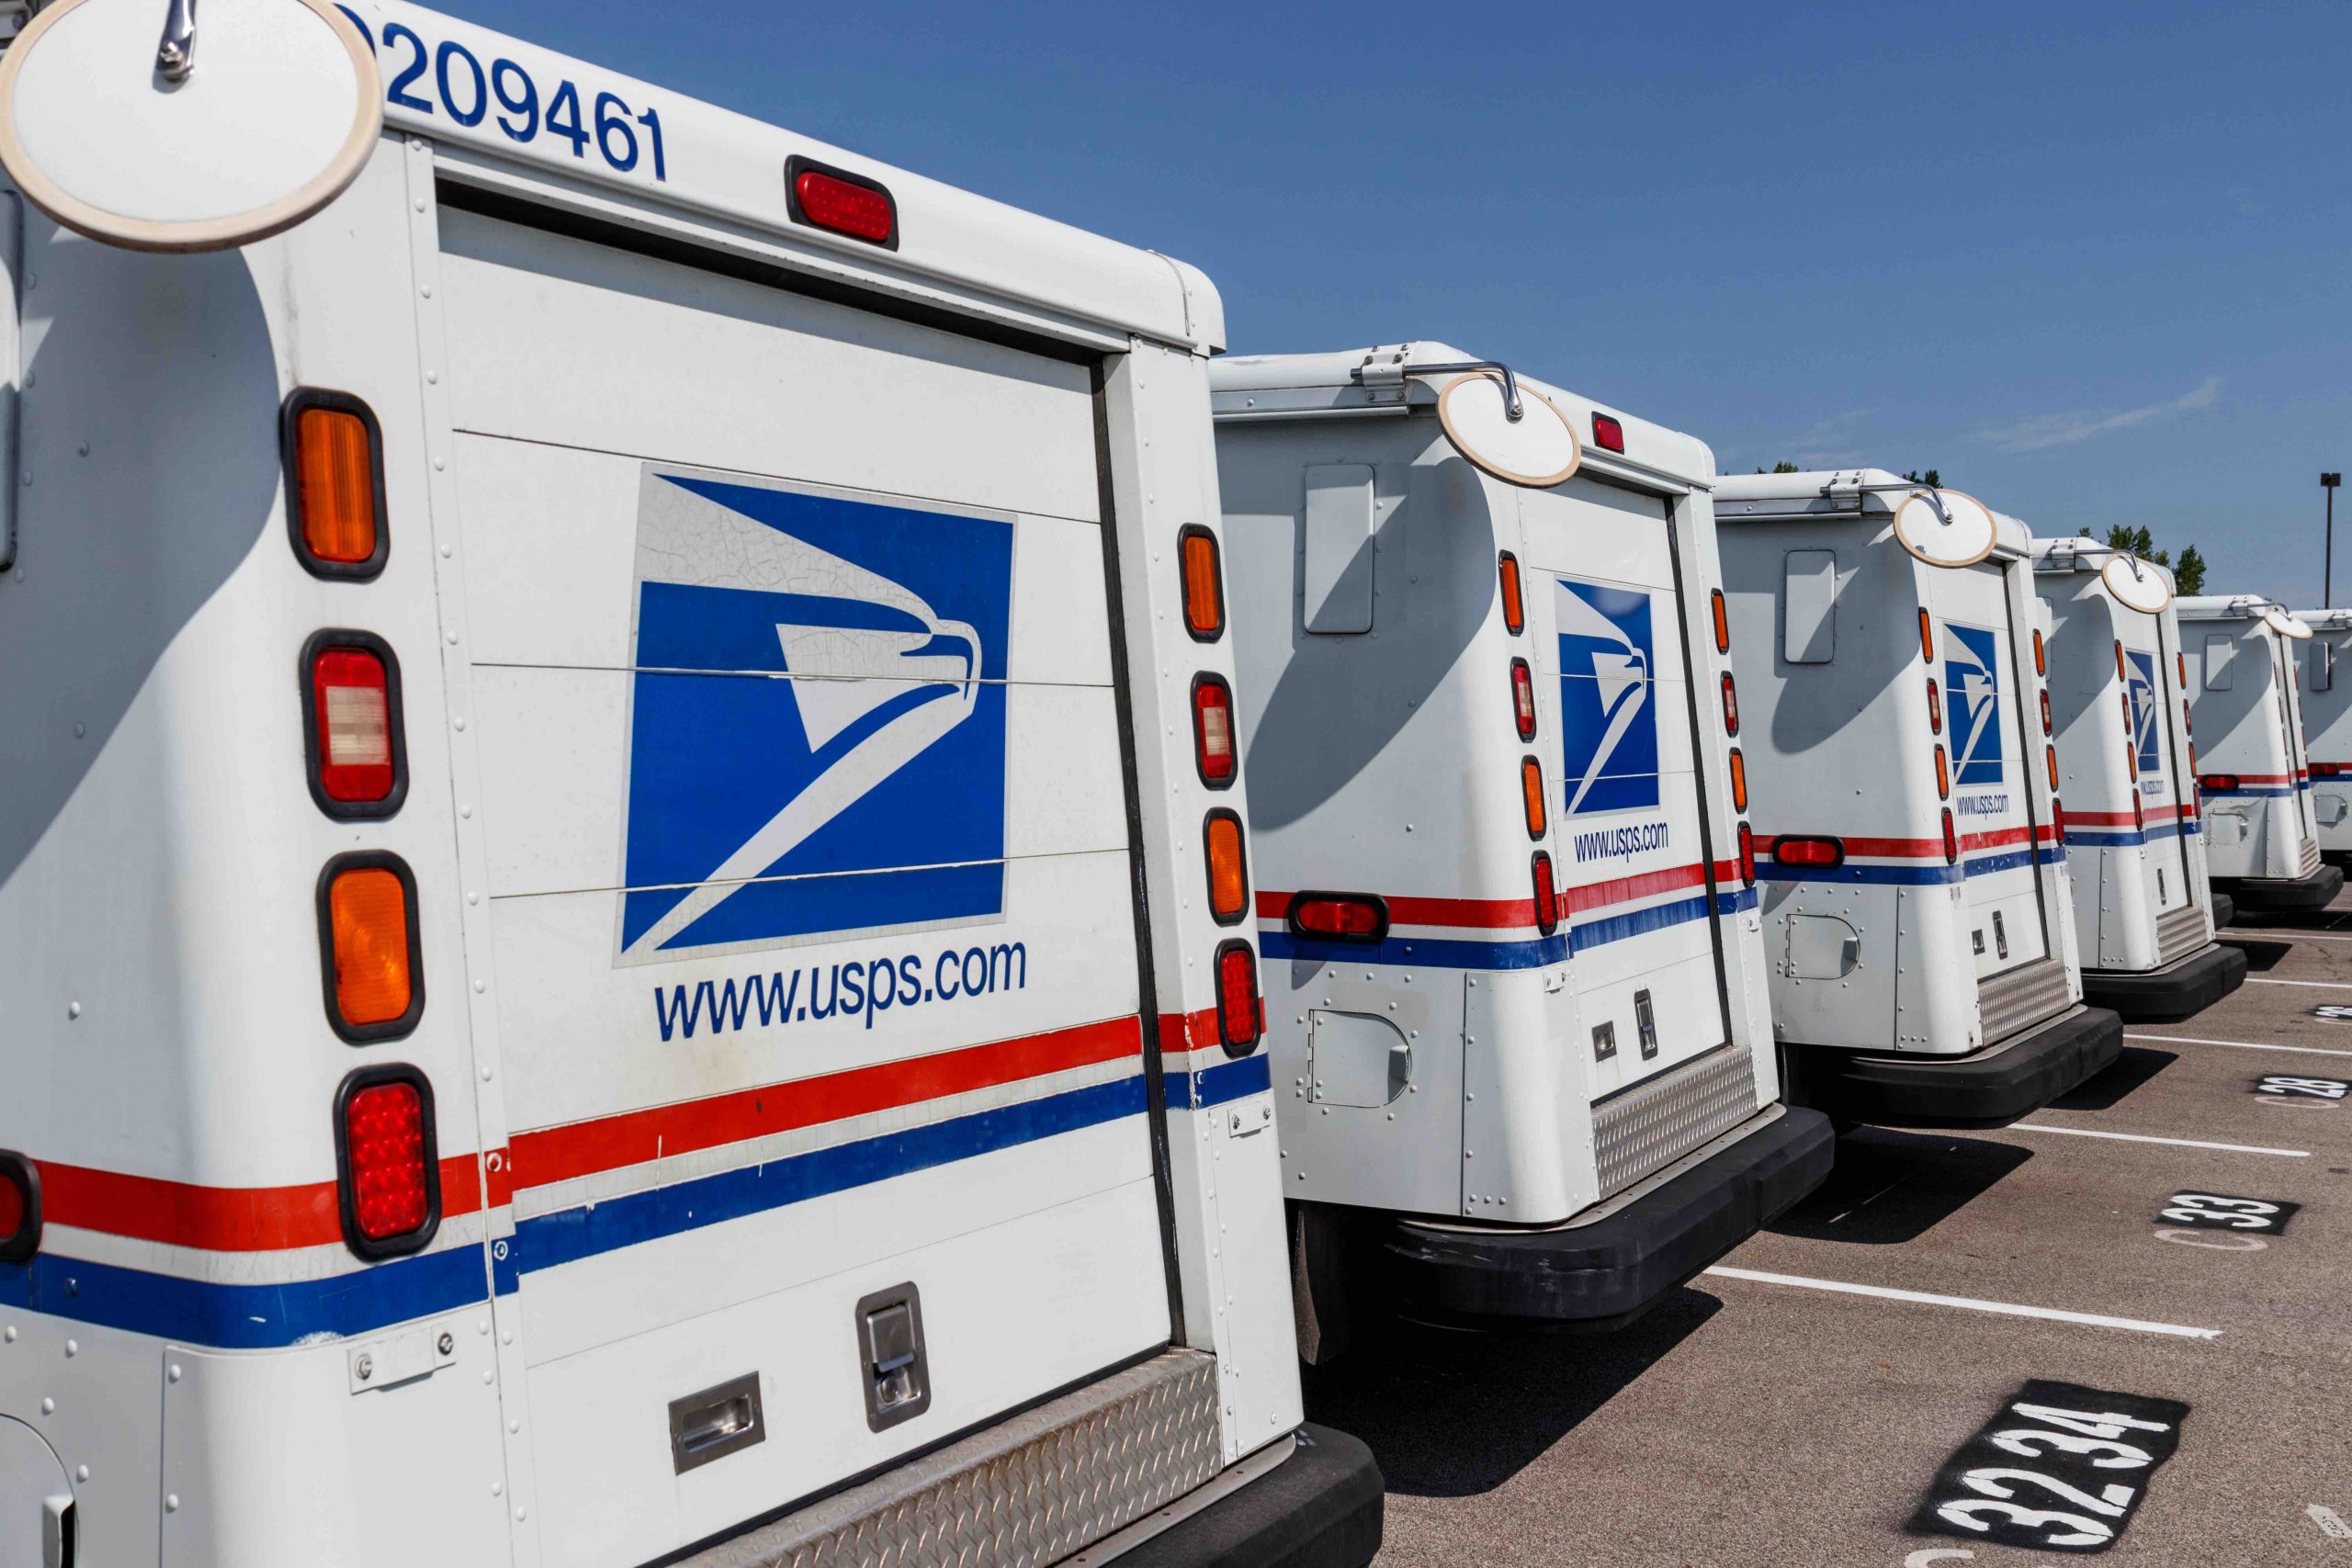 rear view of a line of parked mail trucks